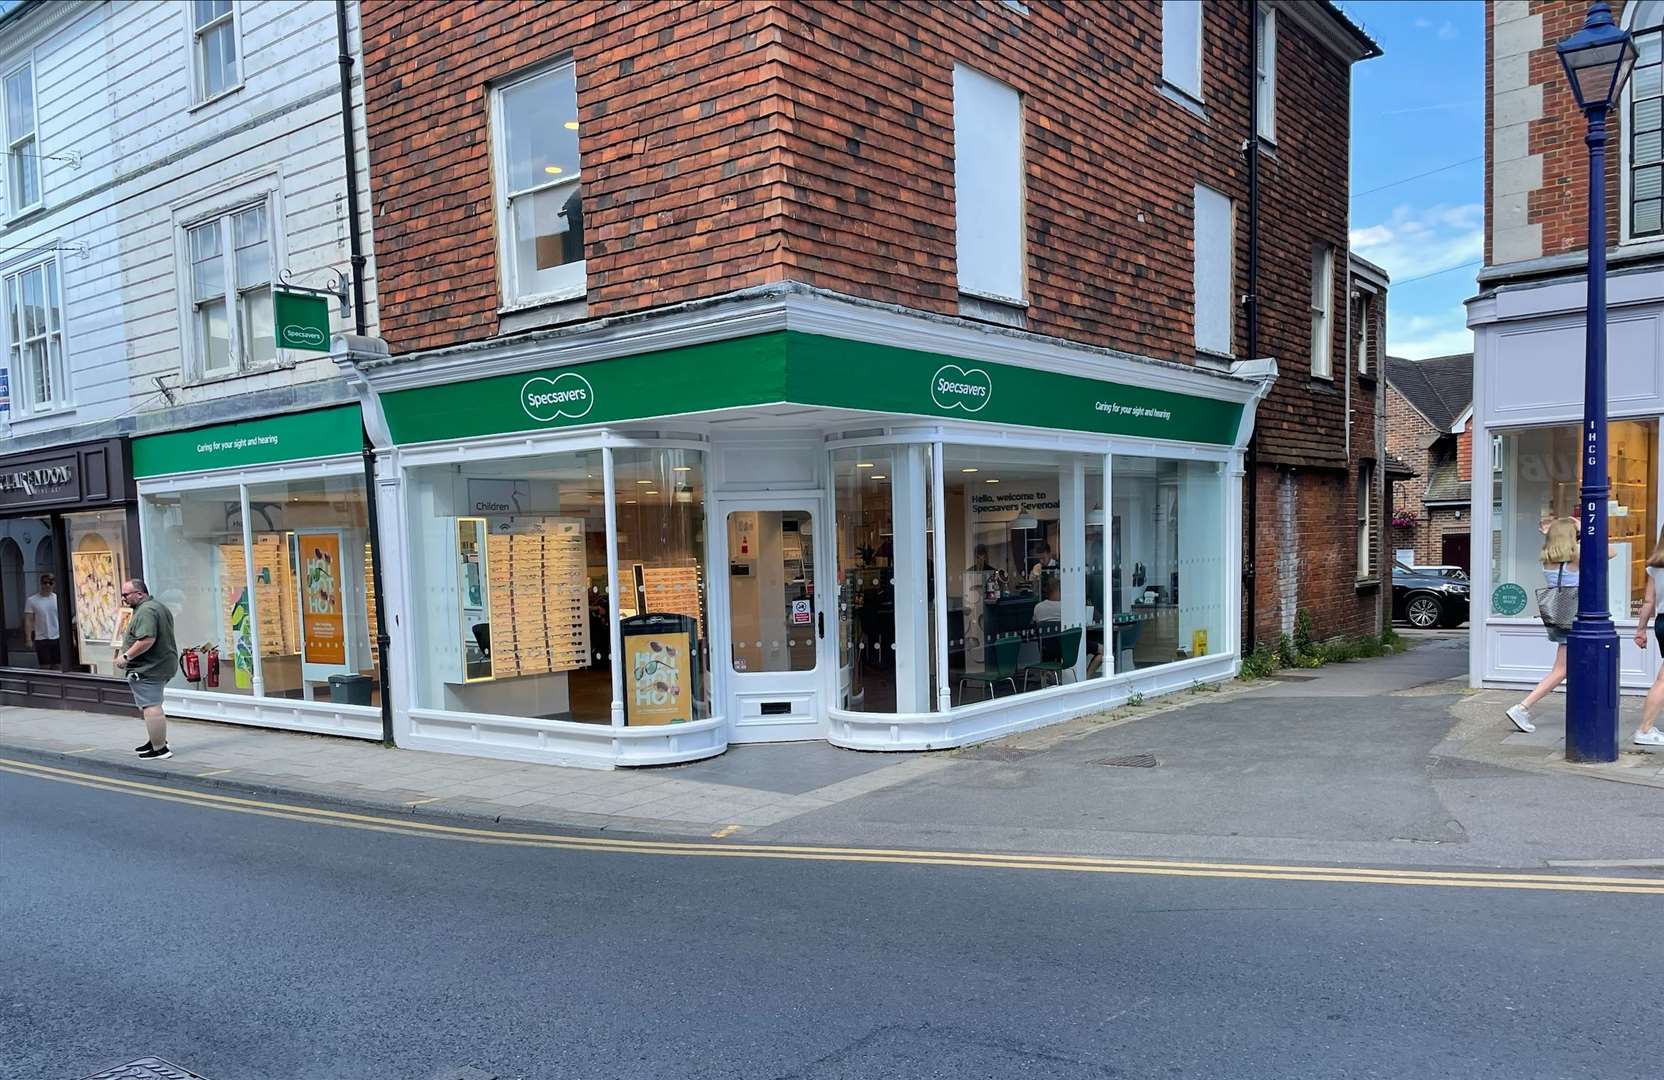 The opticians moved into another building along Sevenoaks High Street. Picture: Tigerbond